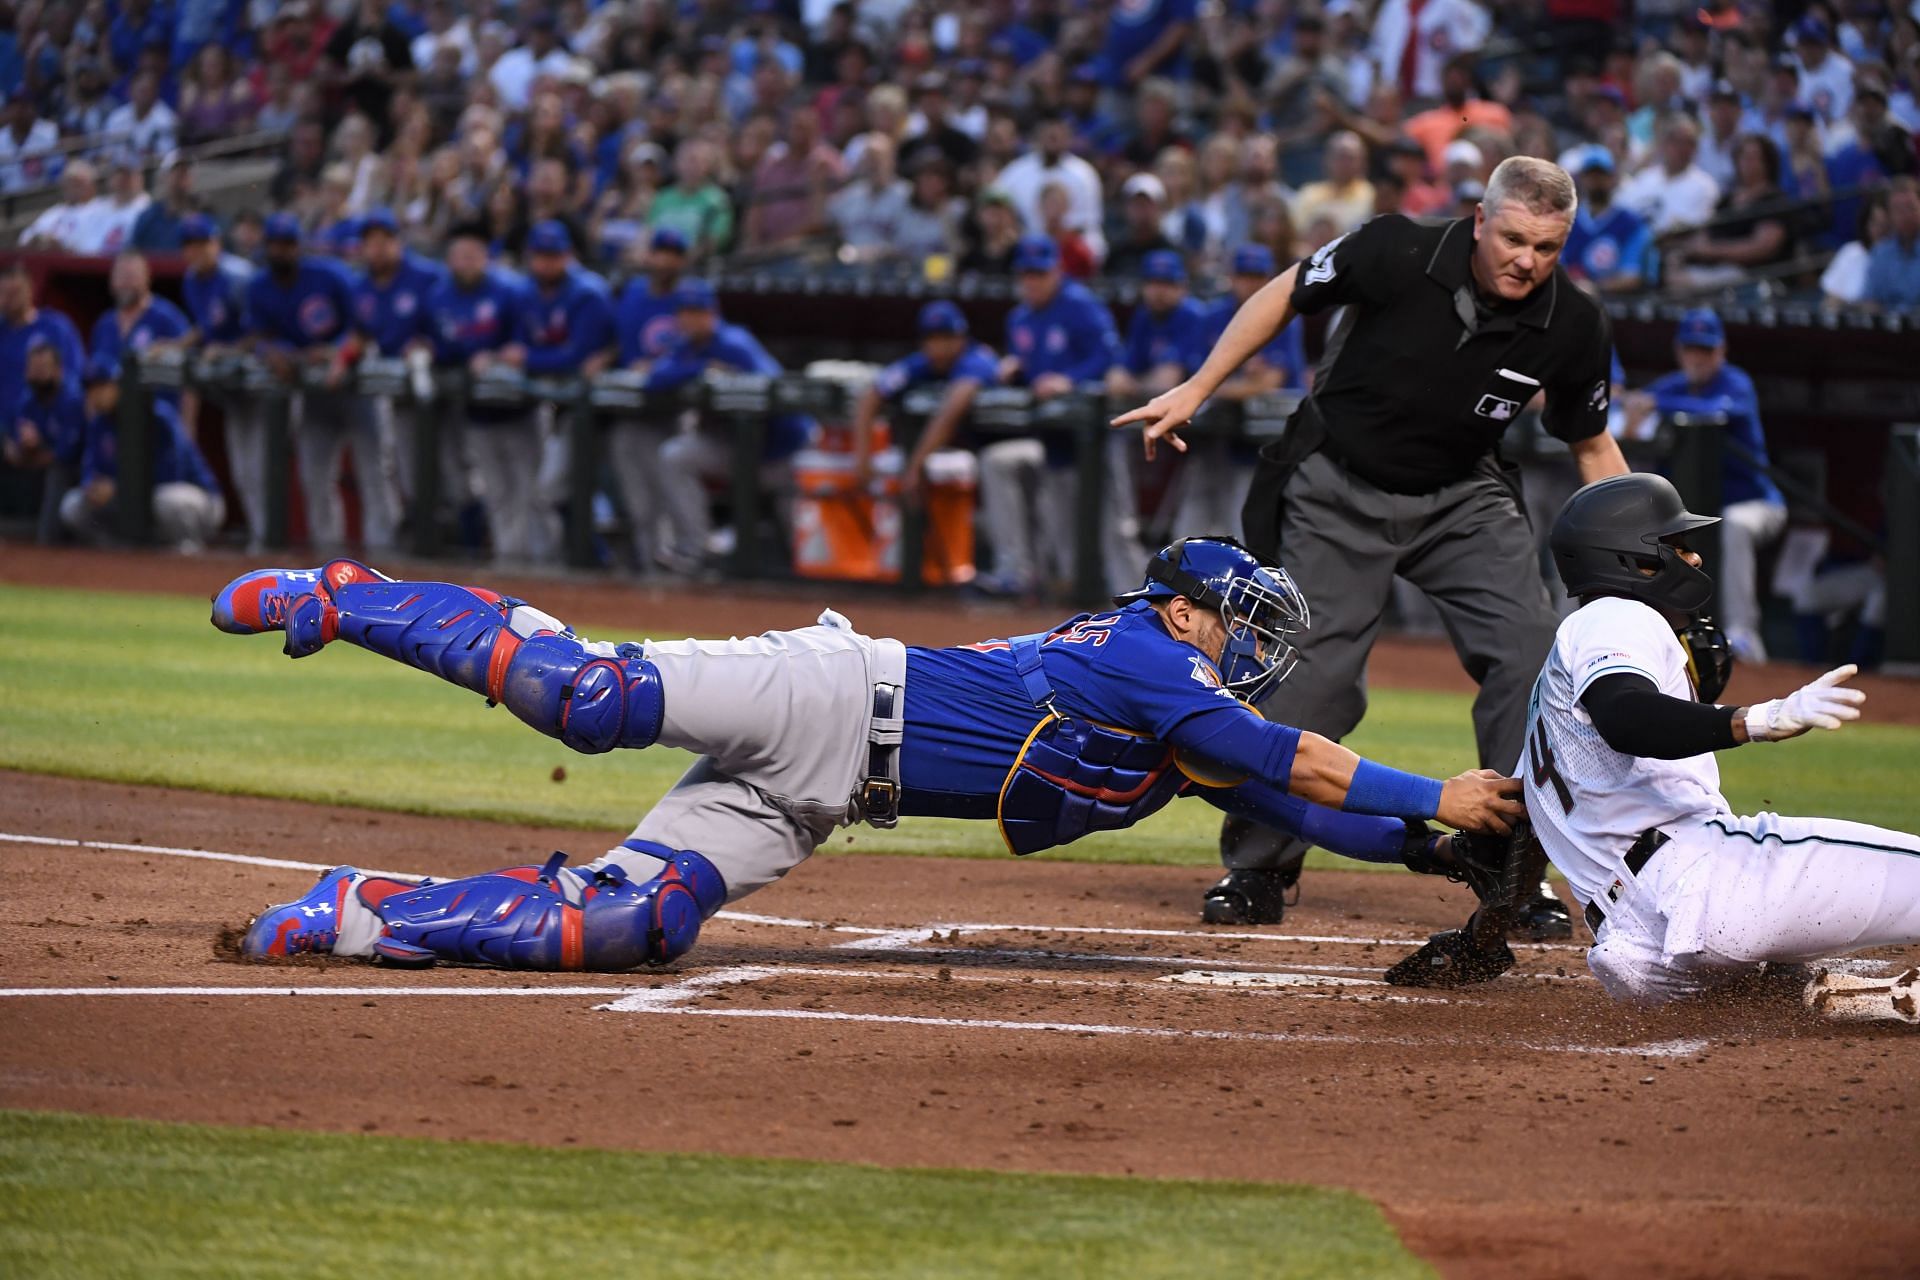 Catcher Willson Contreras of the Chicago Cubs attempts to make a diving tag.